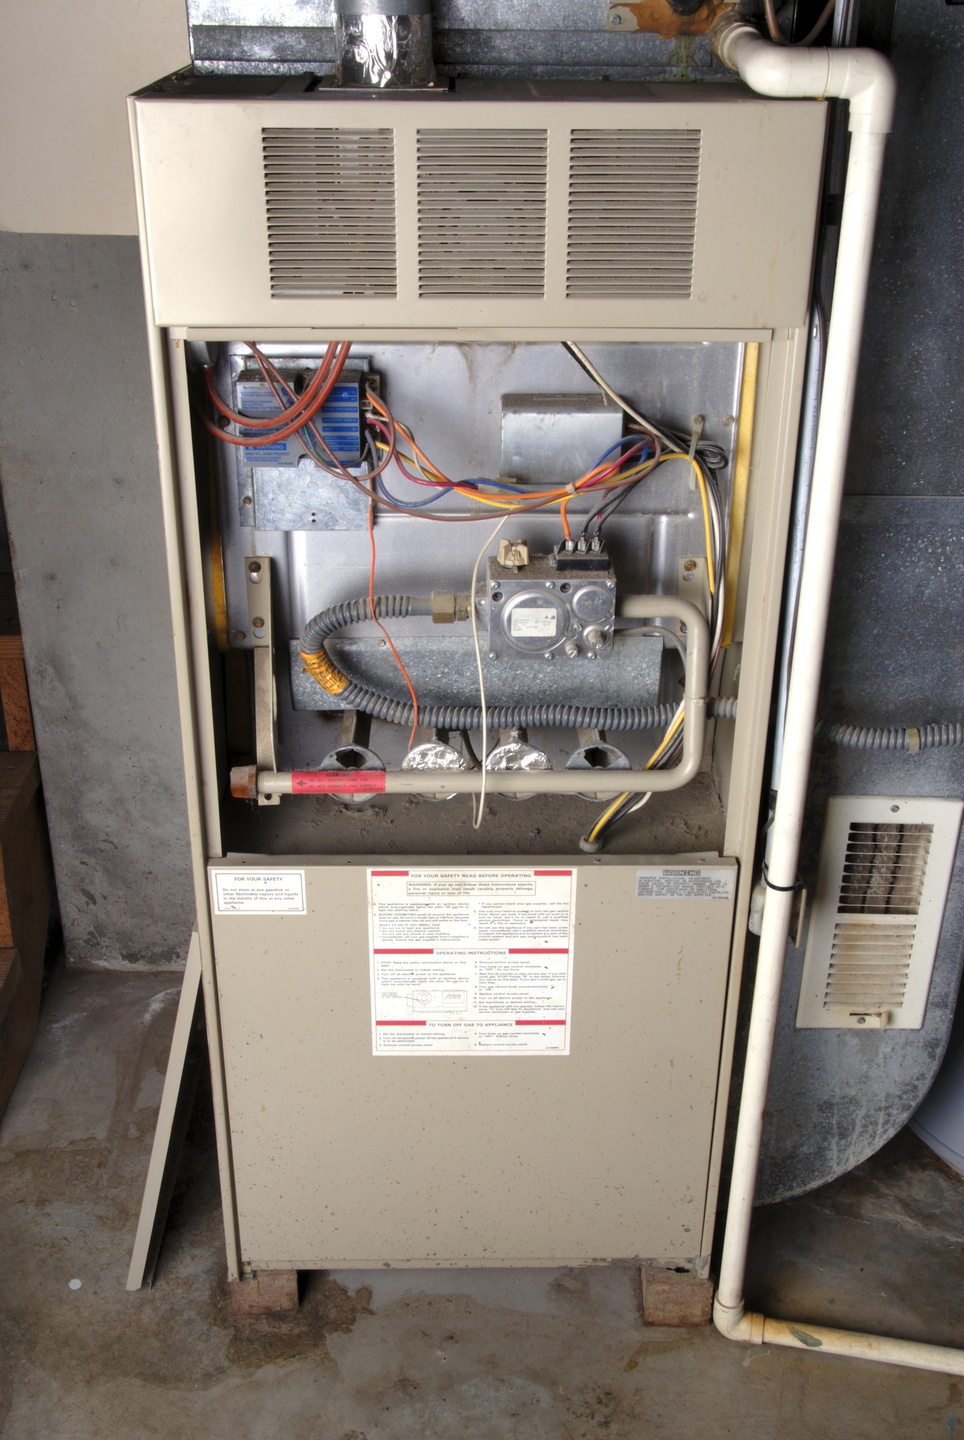 Could Your Furnace Be Unsafe to Run?